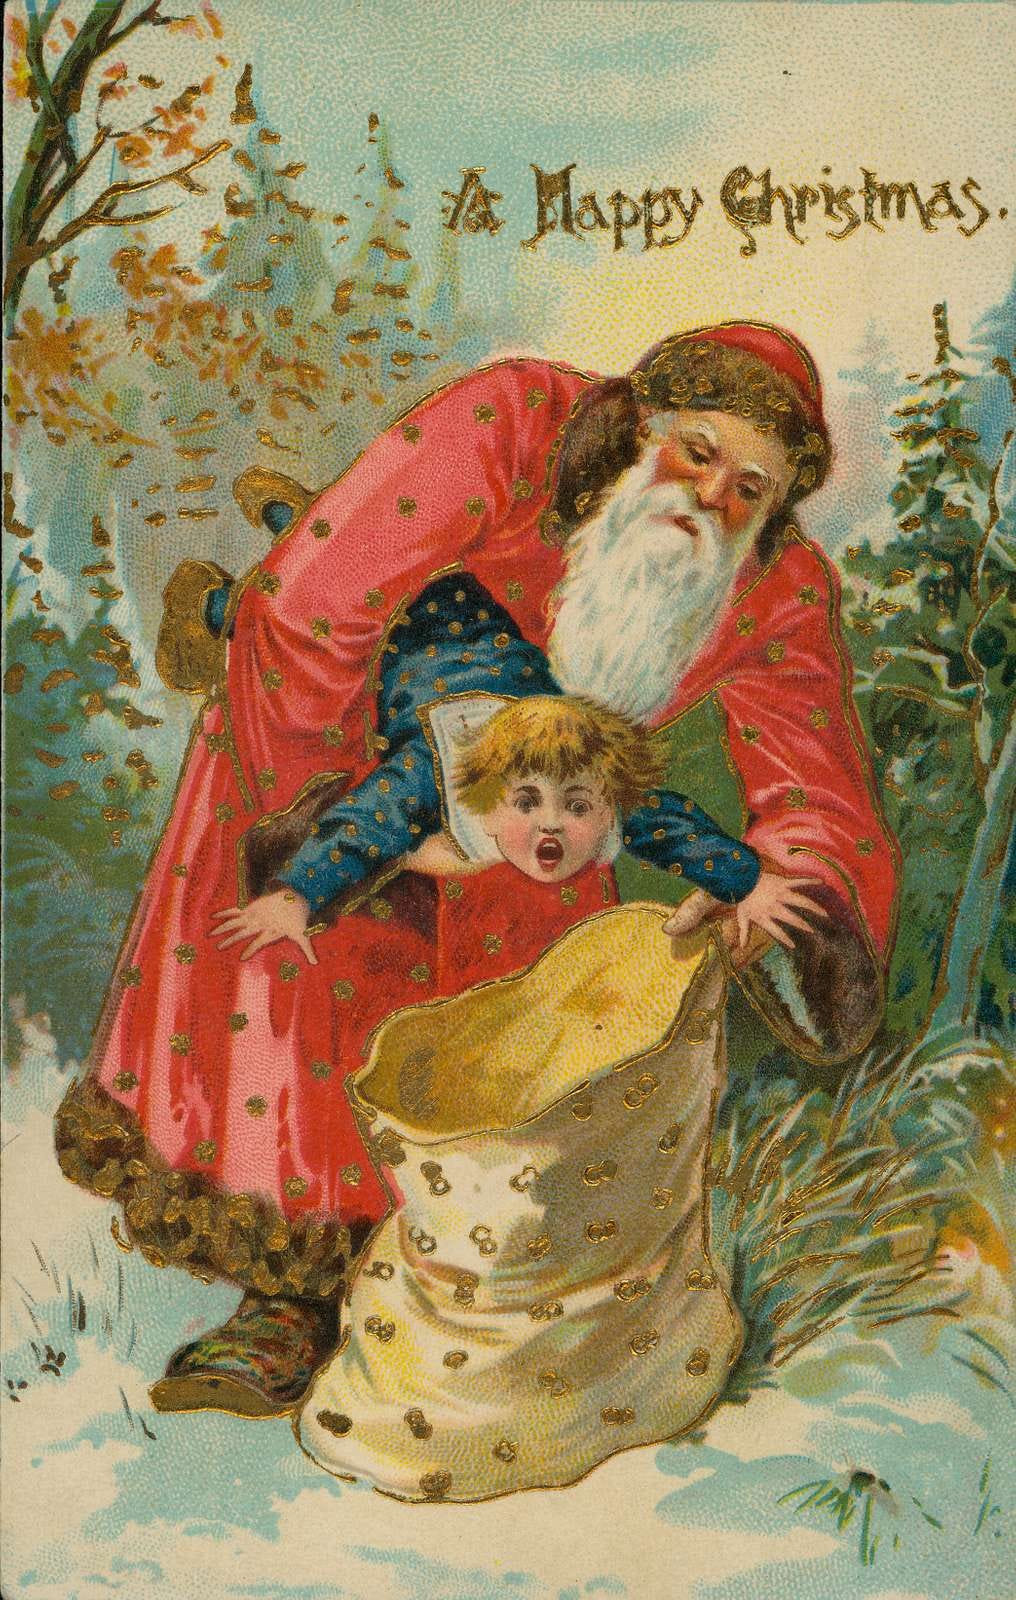 Vintage illustration of Santa Claus attempting to stuff a frightened boy into a sack.